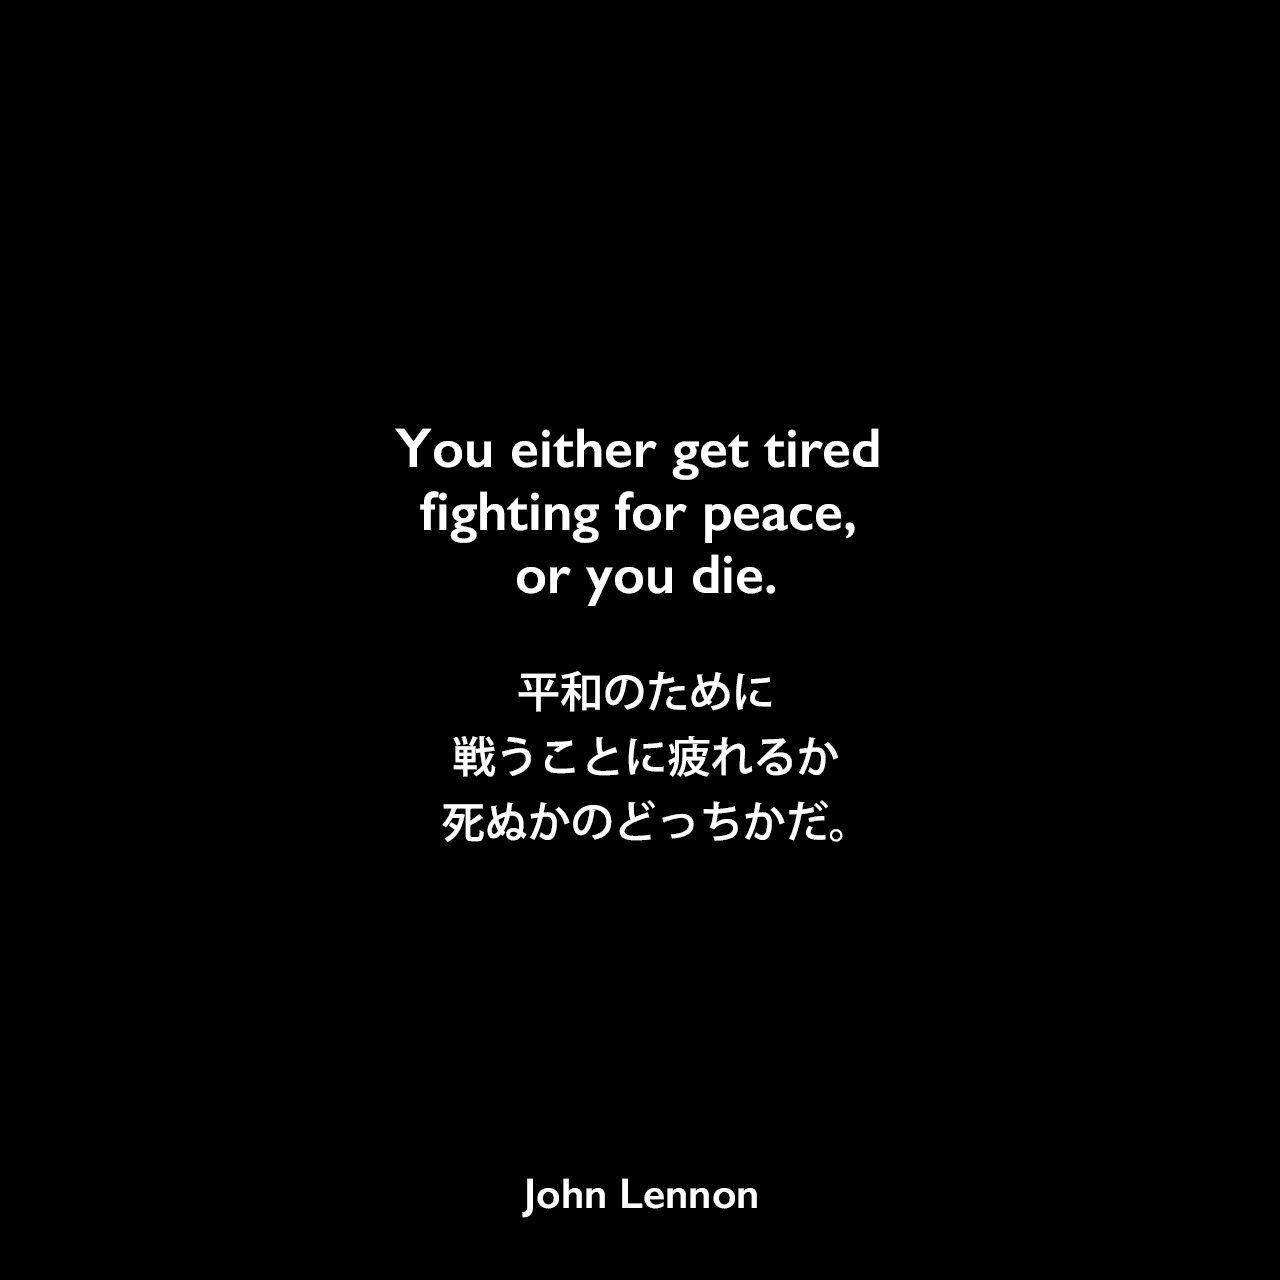 You either get tired fighting for peace, or you die.平和のために戦うことに疲れるか、死ぬかのどっちかだ。John Lennon